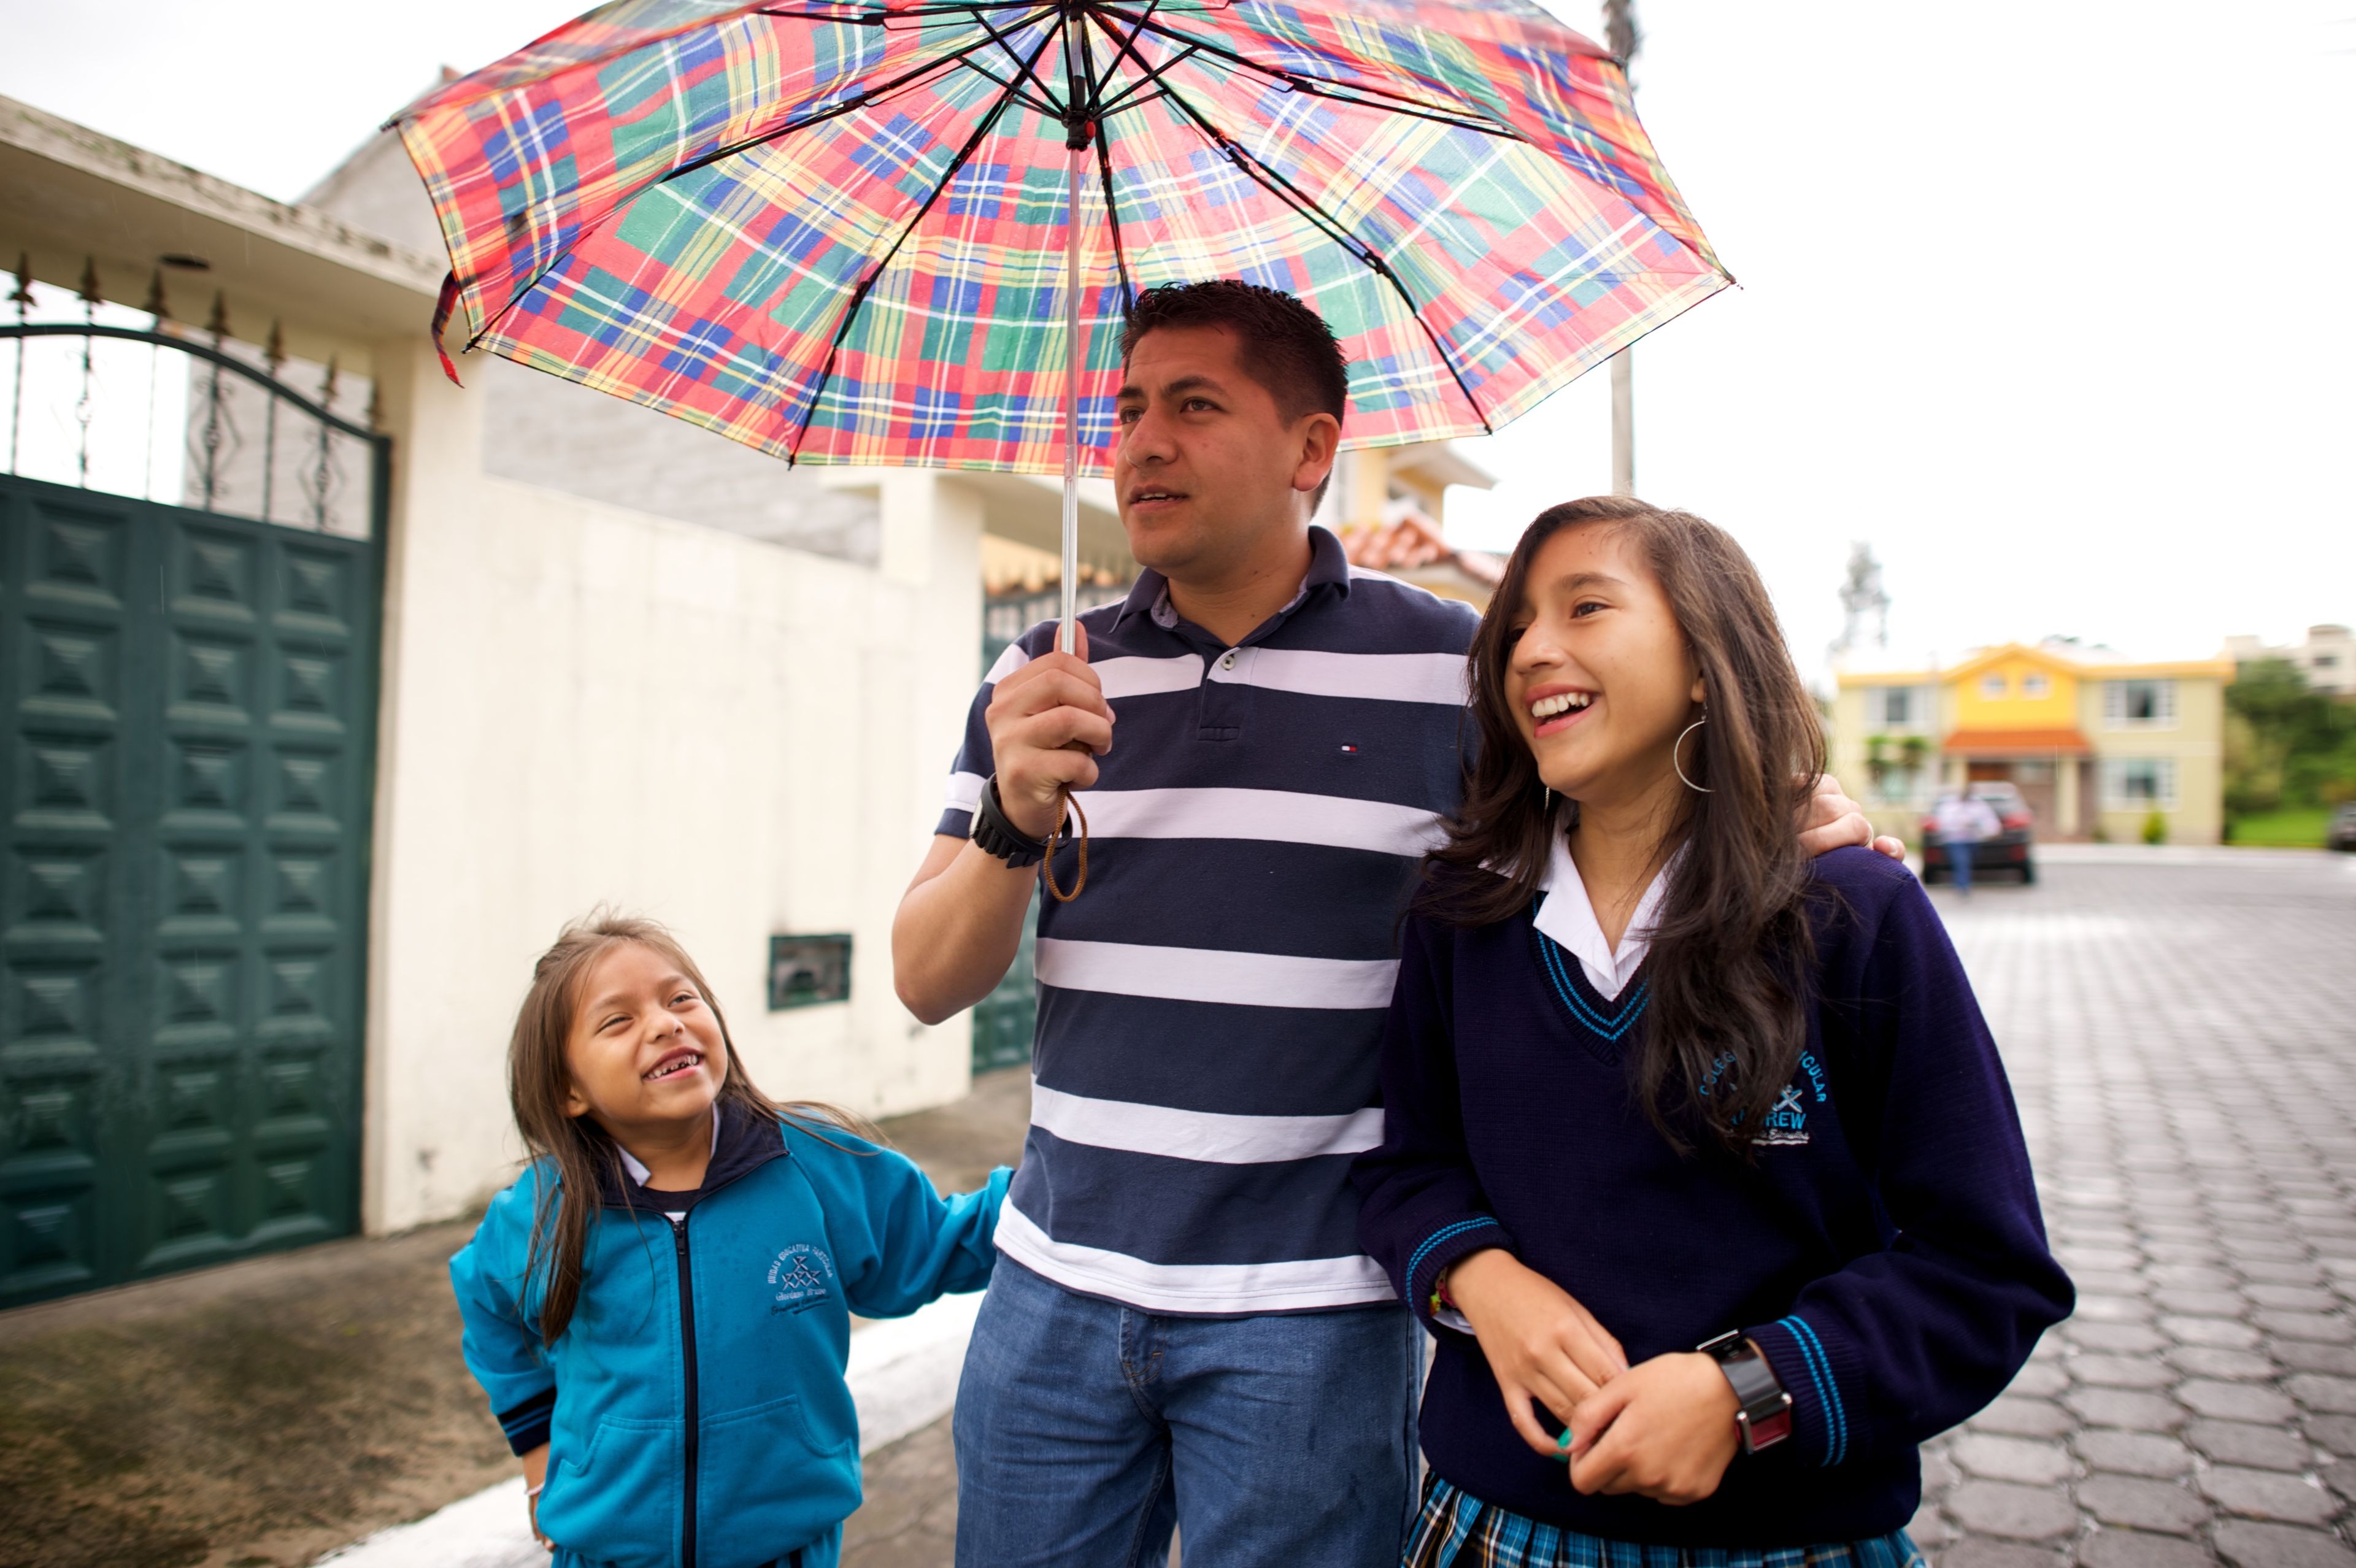 A father and two daughters walk down the road under an umbrella.